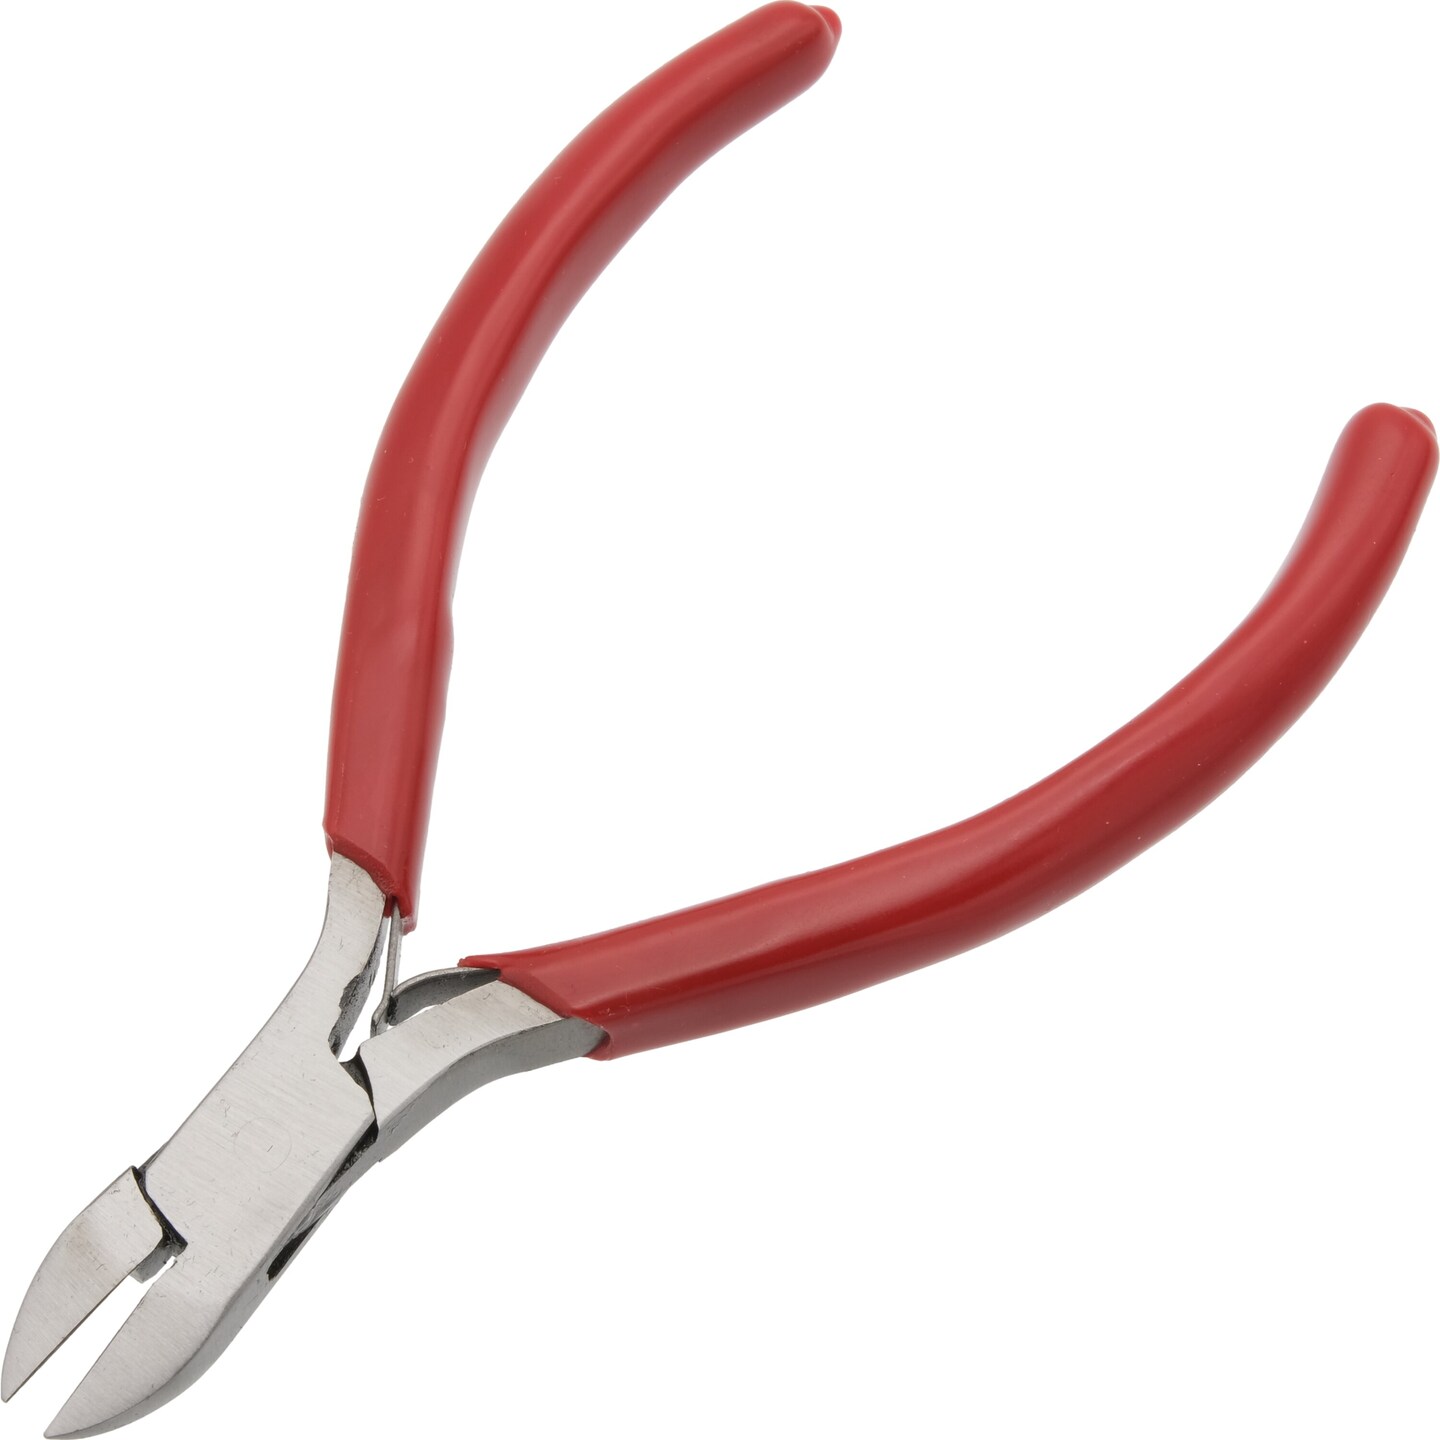 5 Chain Round Nose Pliers Cutters Jewelers Beading Tool